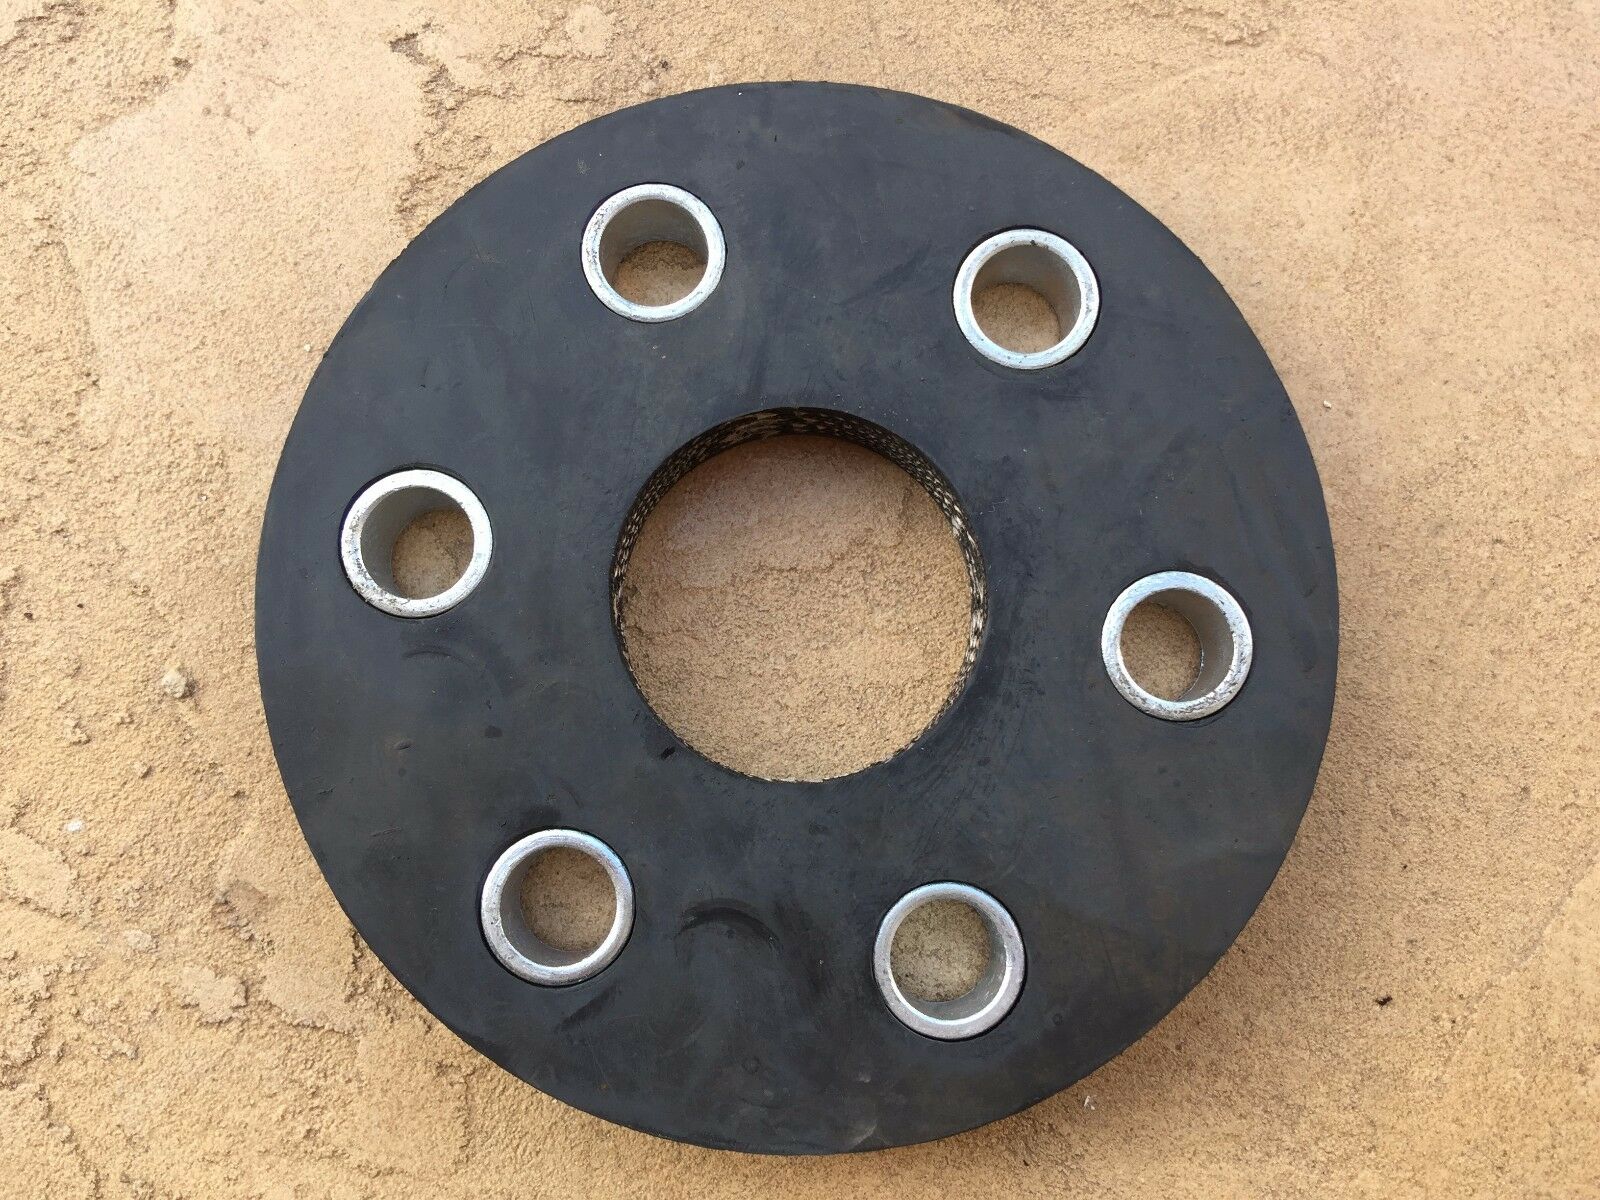 New Flex Coupler Rubber Pad Disc With Spacers Installed On Free Shipping